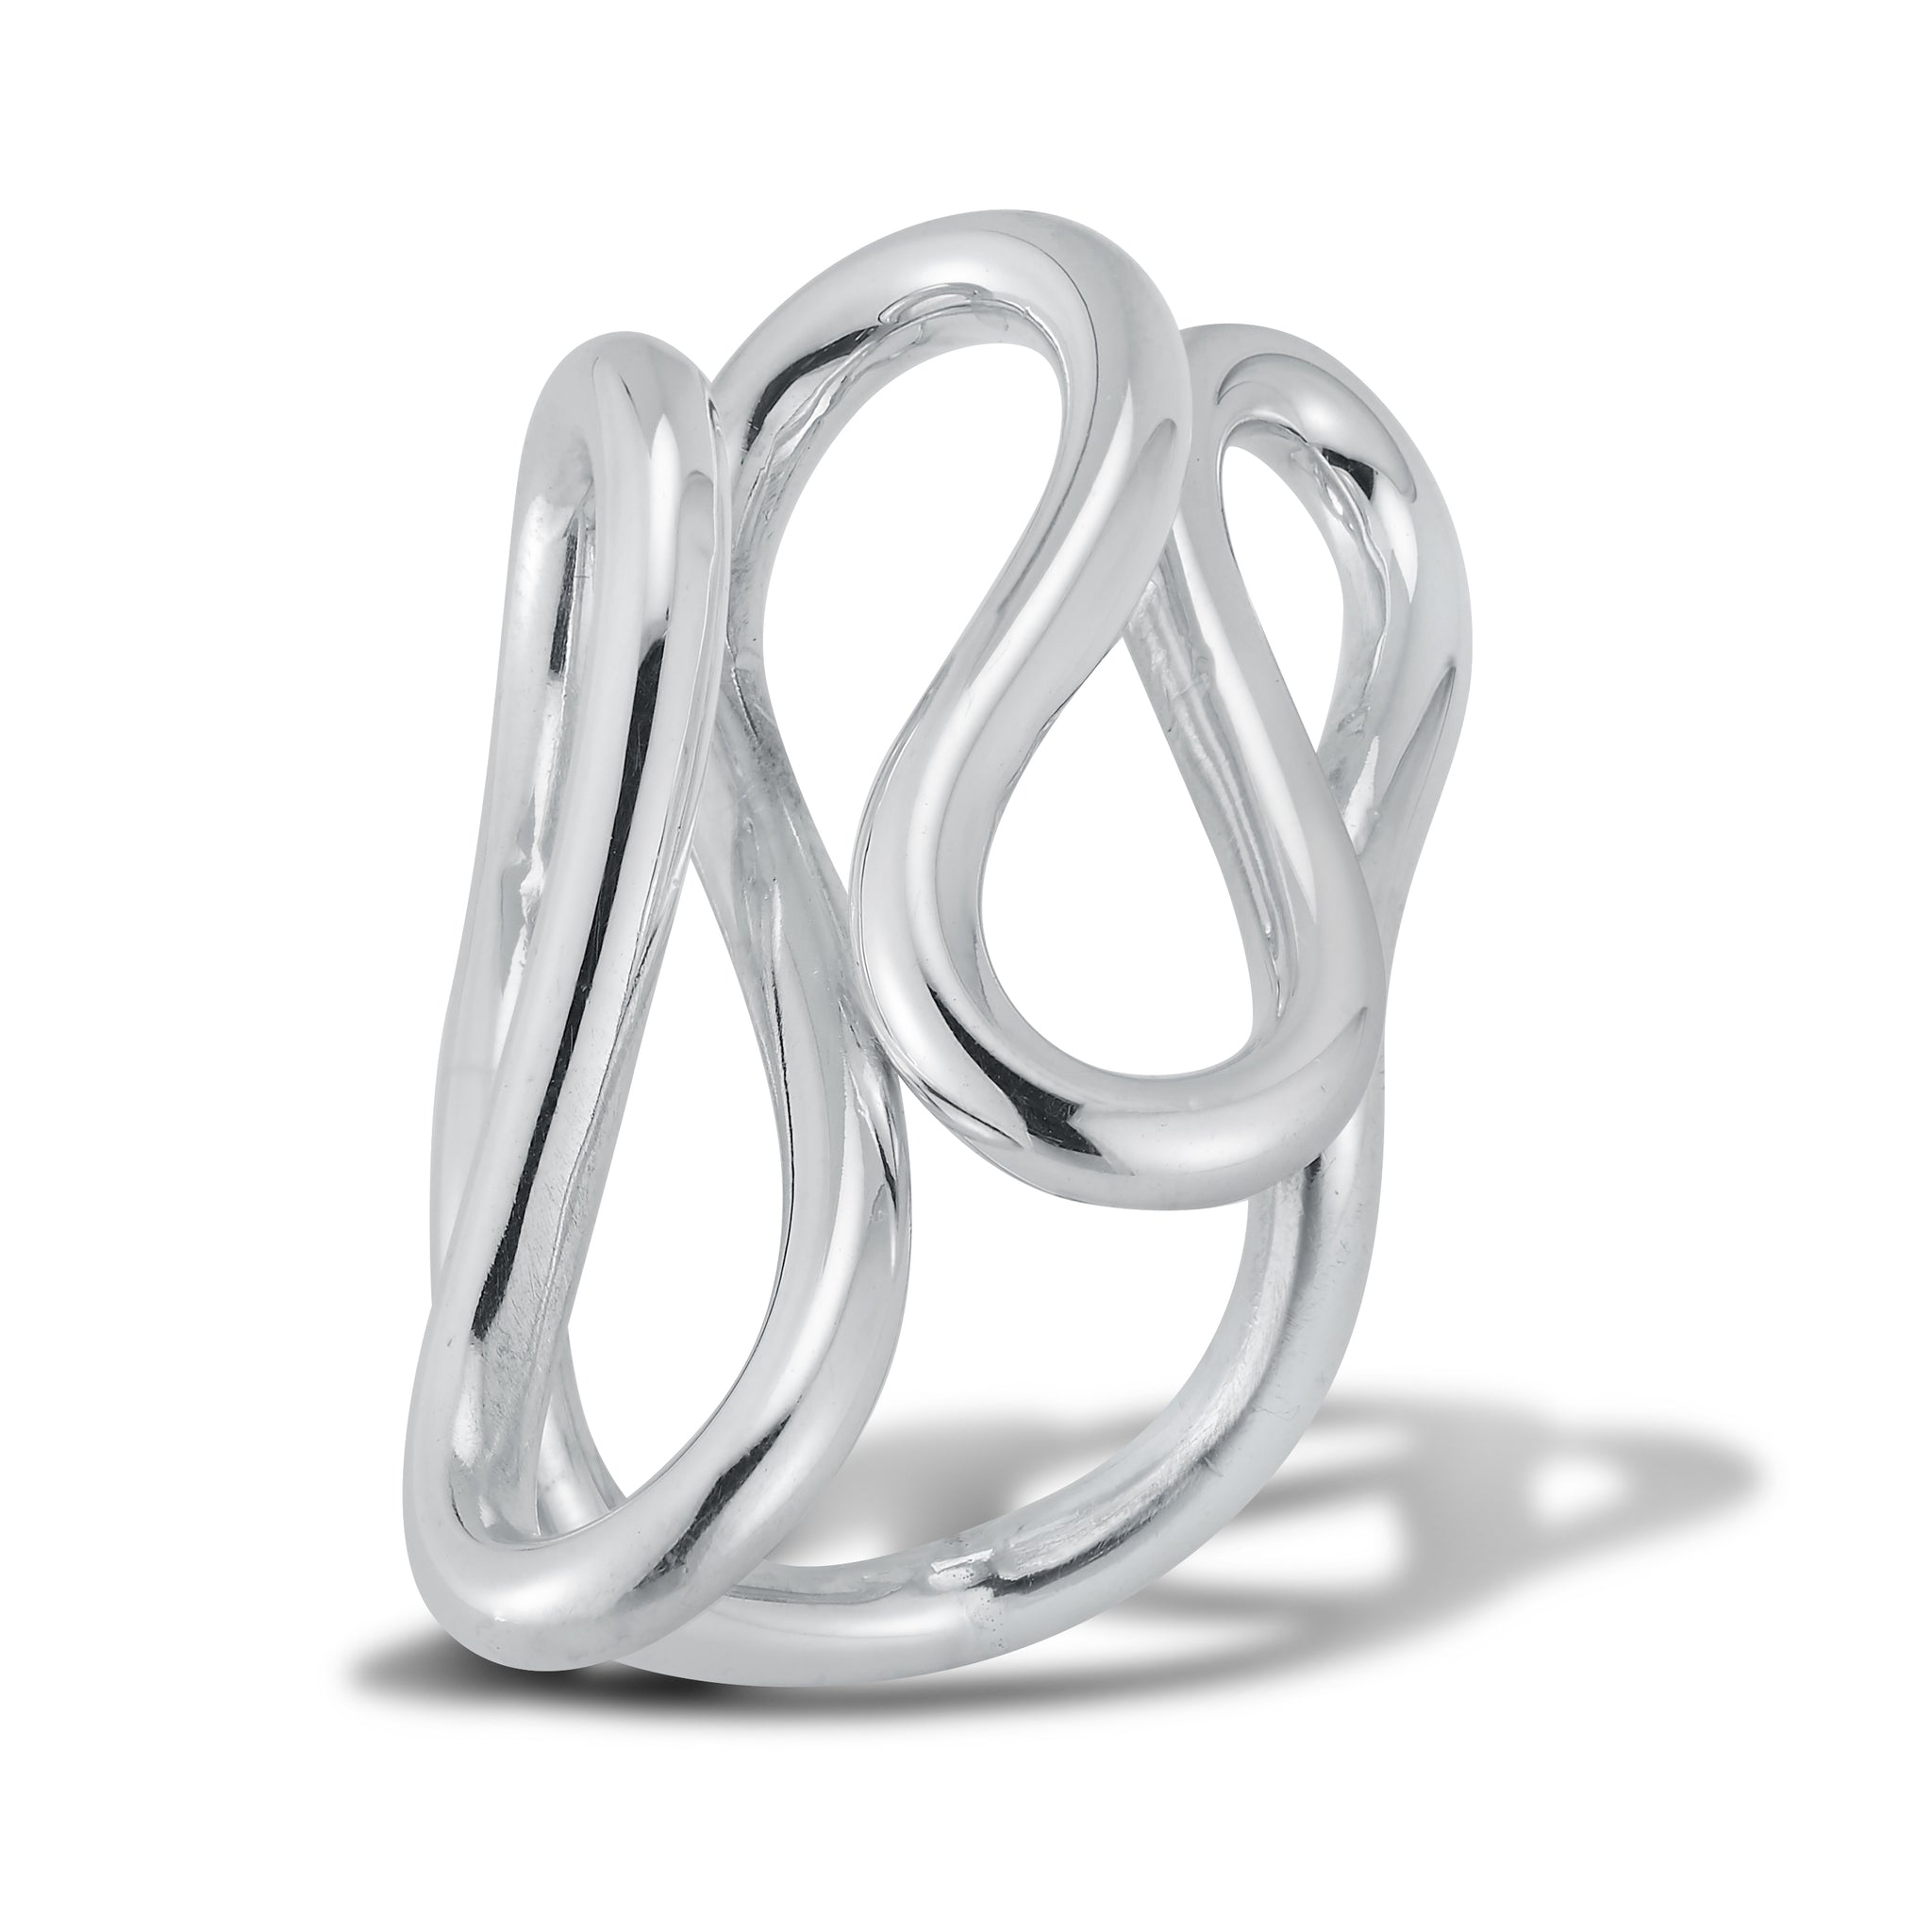 This is a freeform hand fabricated ring. It's truly a sculptural piece one that is unique in the way the shape flows, but also each piece will bend slightly differently as I hand form each ring.  It is made out of 3mm sterling silver wire. Ring is finished in high polish.  It's about 1.5" long and 1" wide on the top. I suggest you wear it on the middle finger for best statement as well as perfect fit between the fingers.   Hand crafted in Brooklyn, New York 